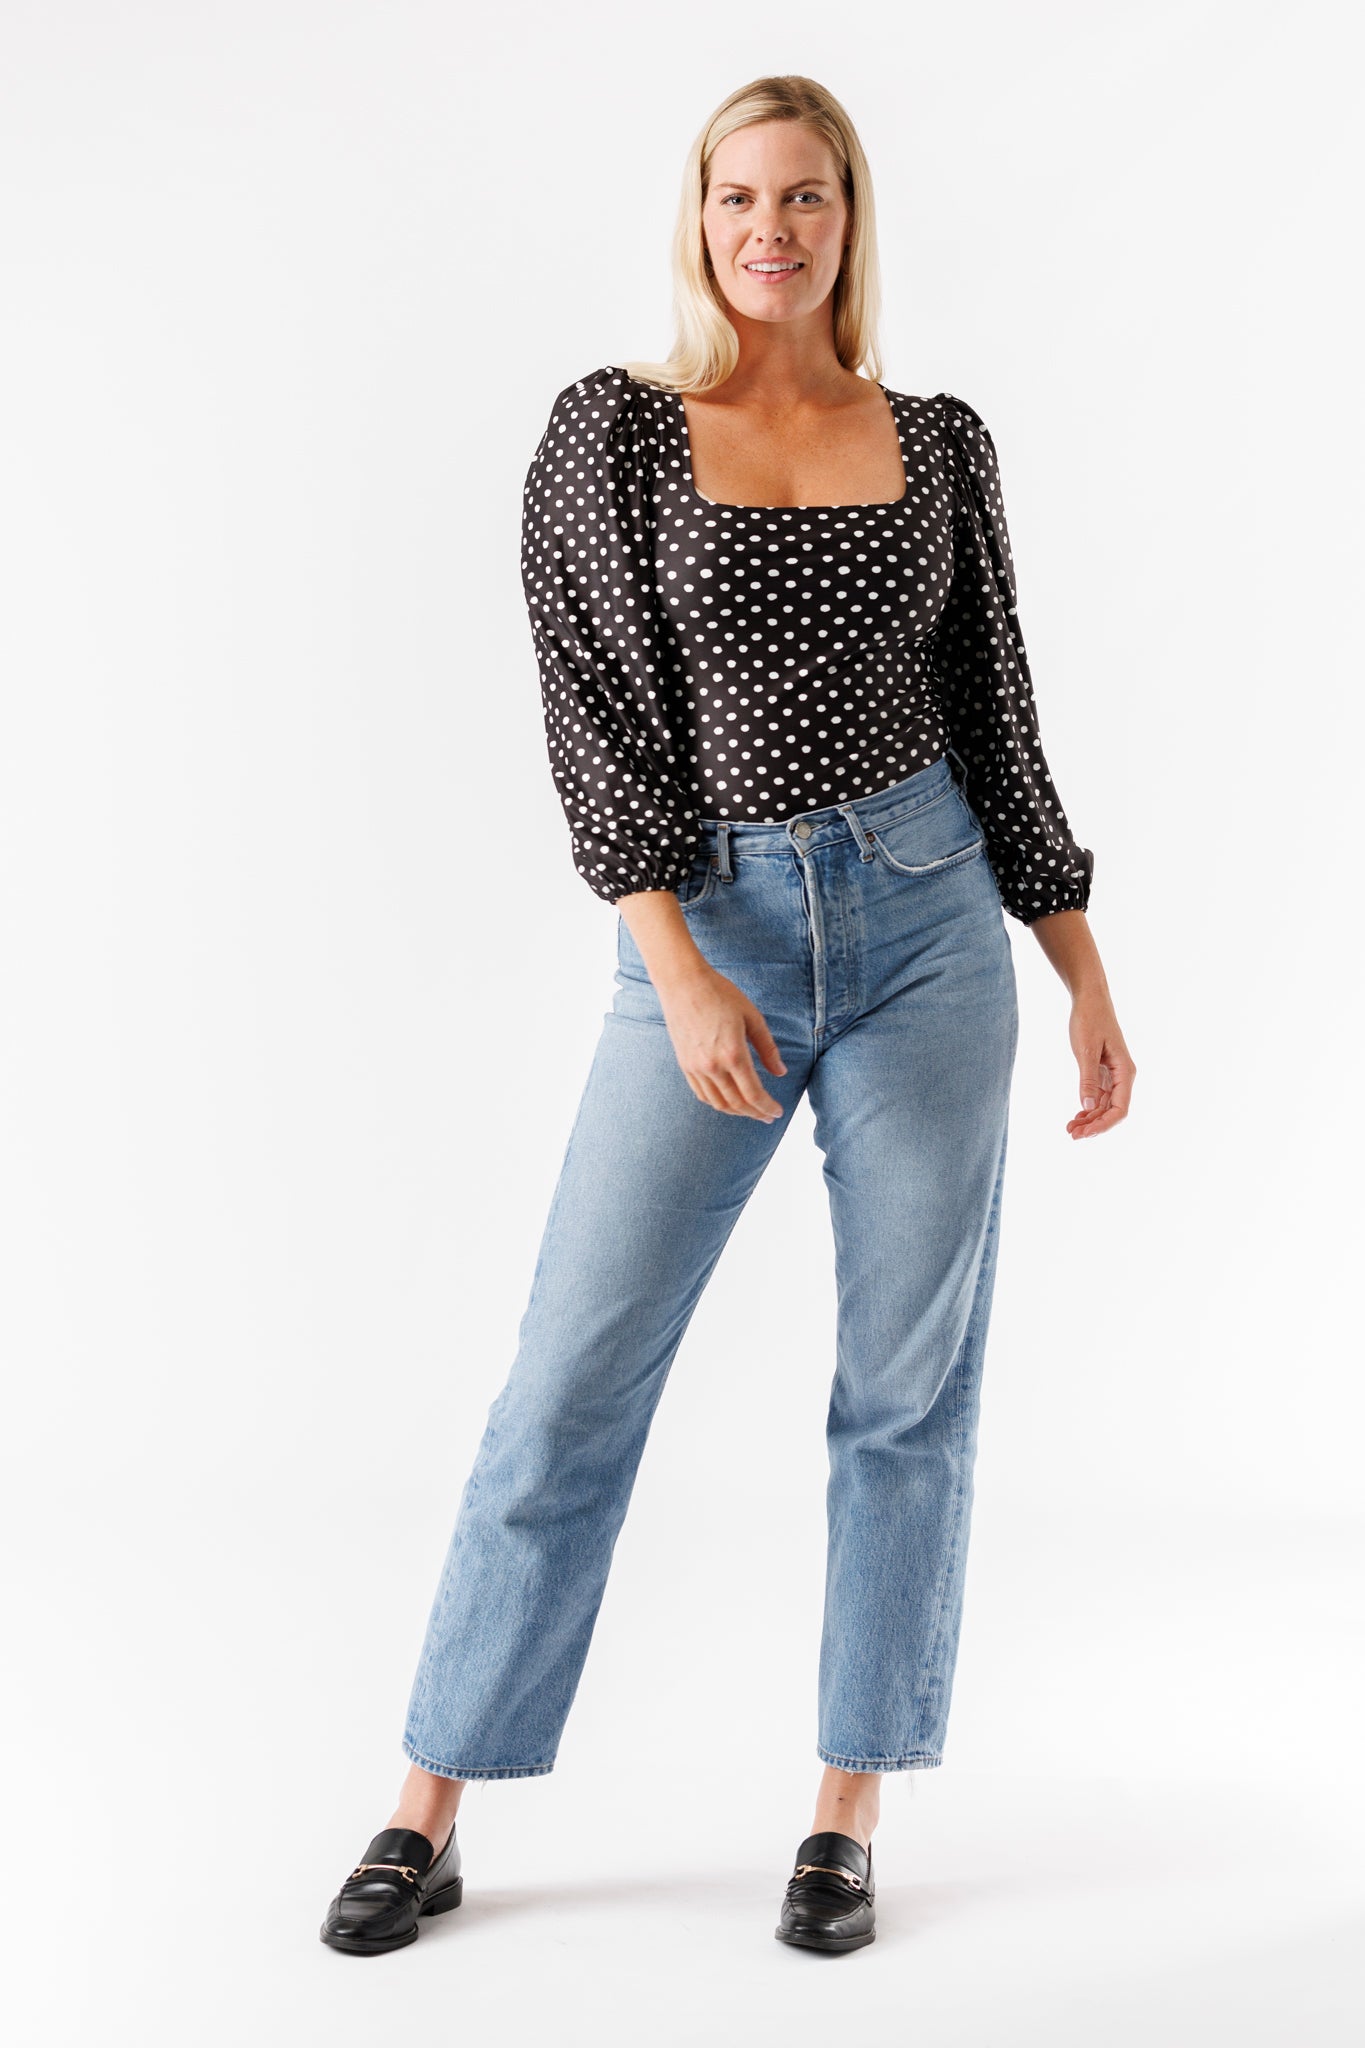 The Colette Top - Lover's Dot